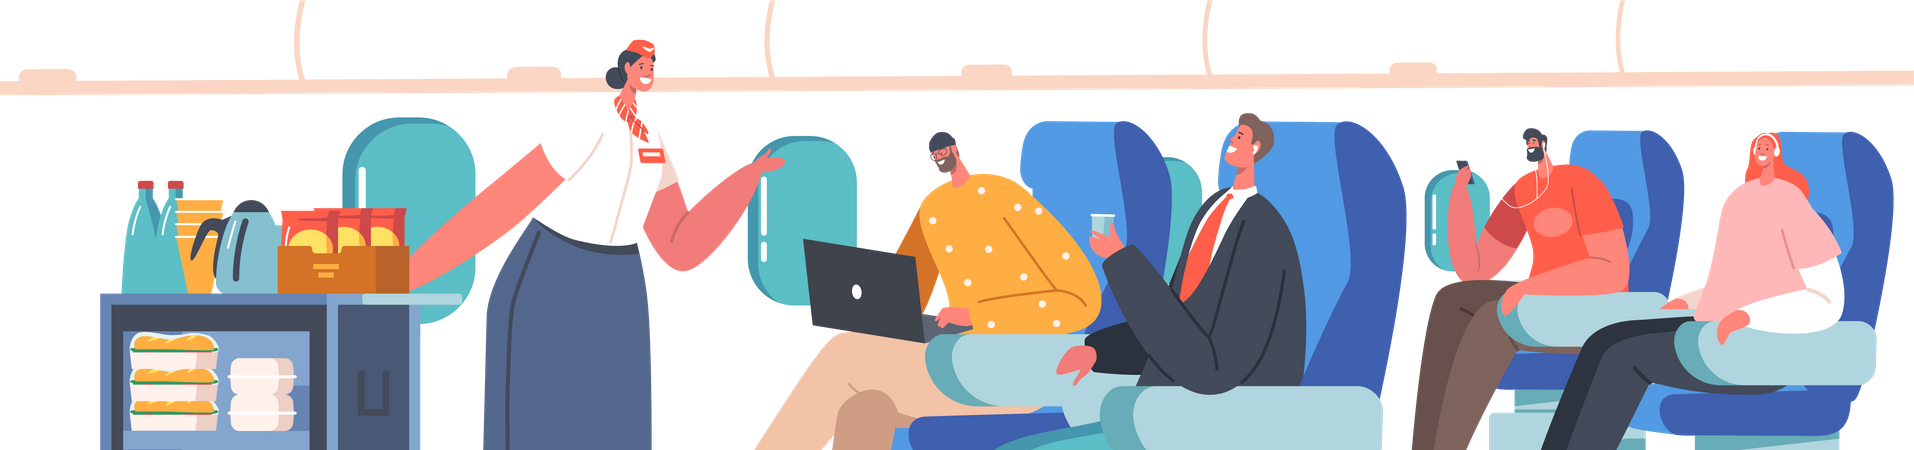 Airplane Crew and Passengers in Plane Illustration